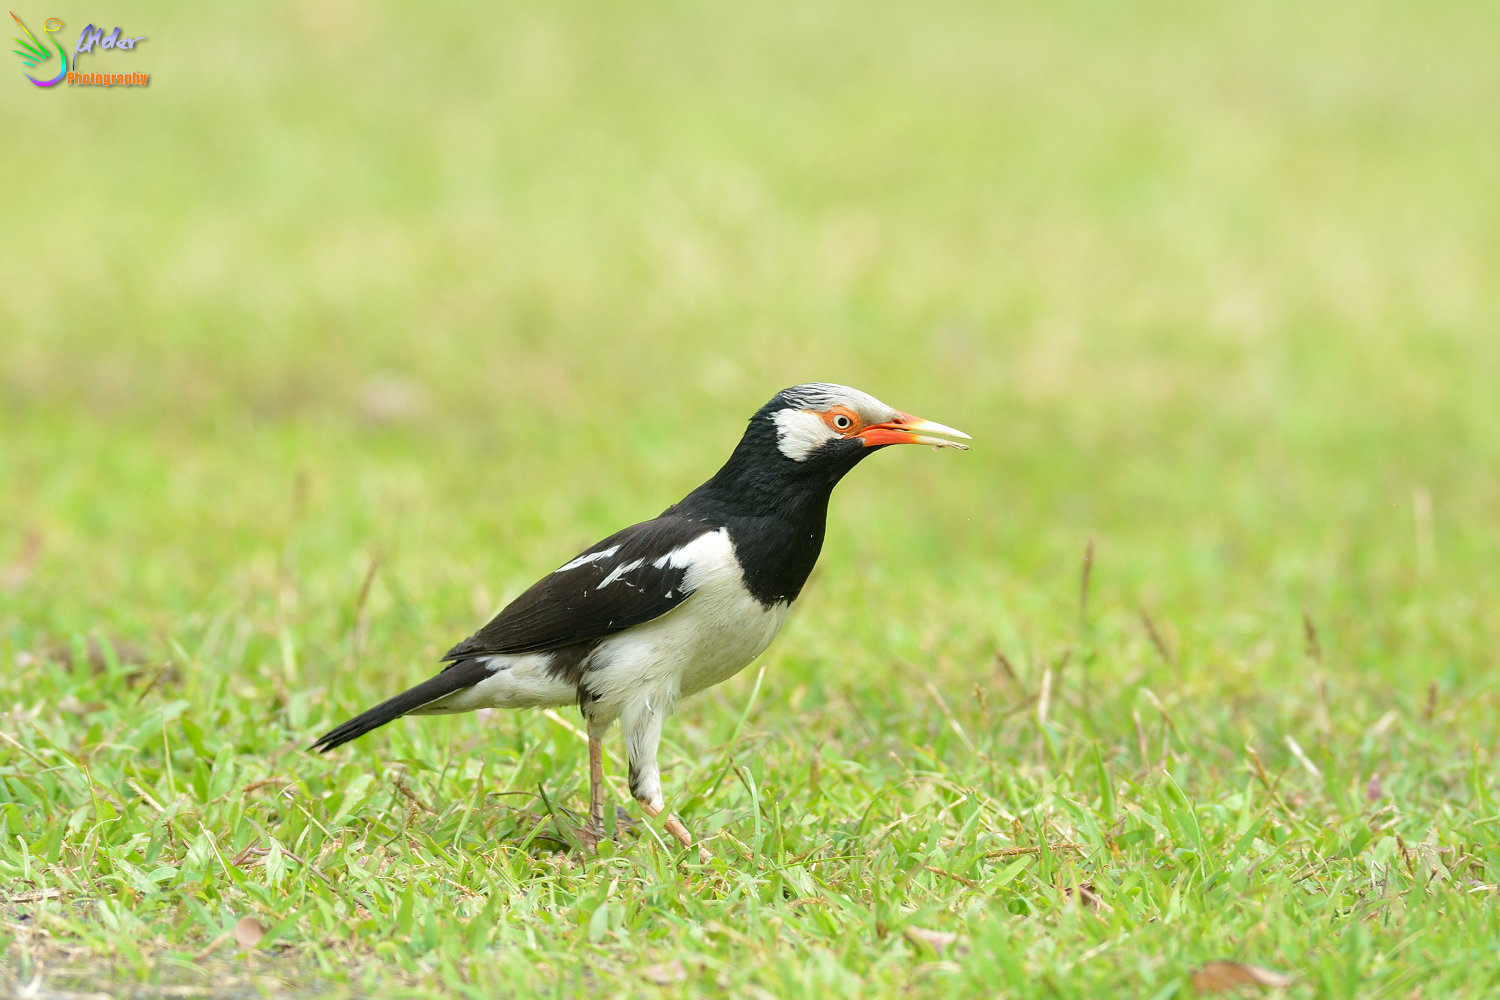 Asian_Pied_Starling_1500